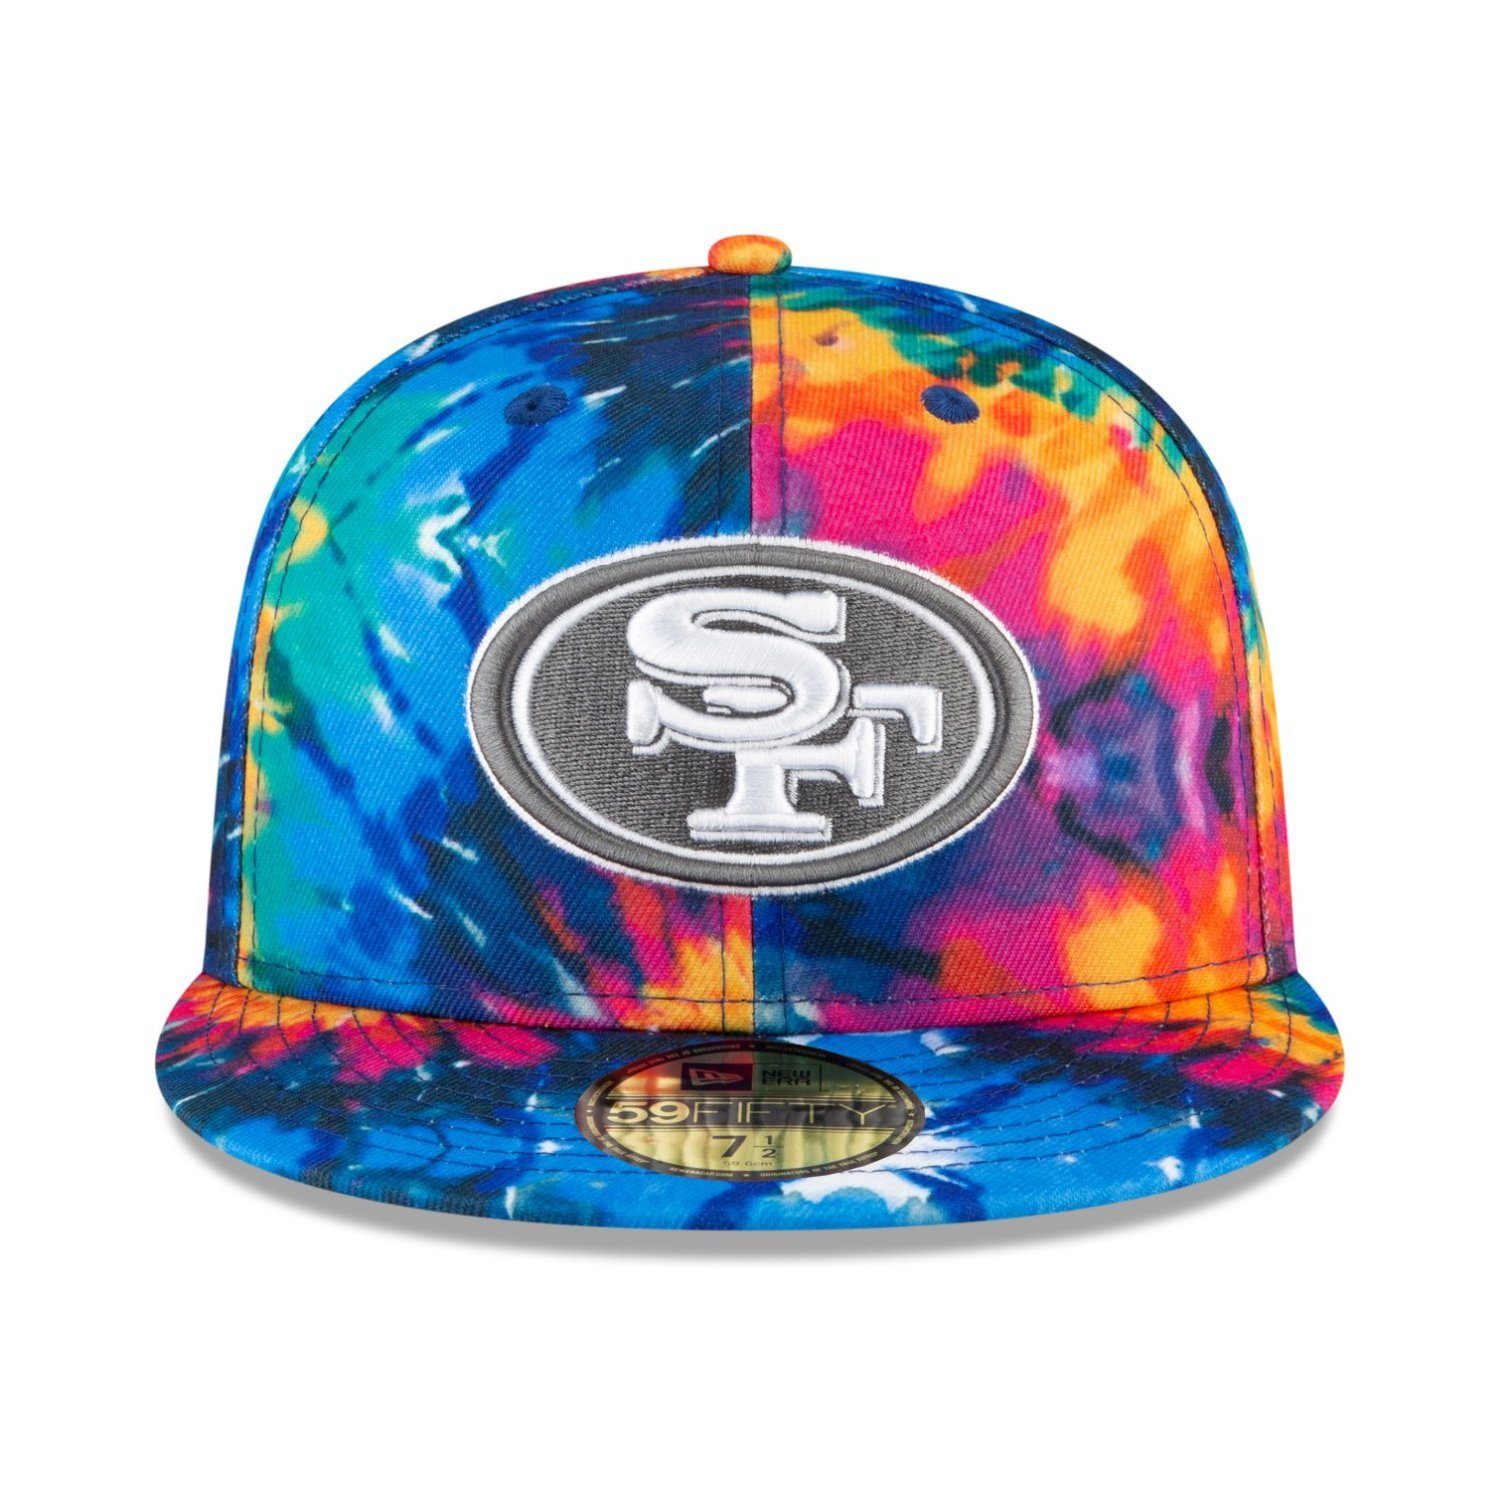 CATCH CRUCIAL New San Era NFL Fitted Teams 59Fifty 49ers Cap Francisco